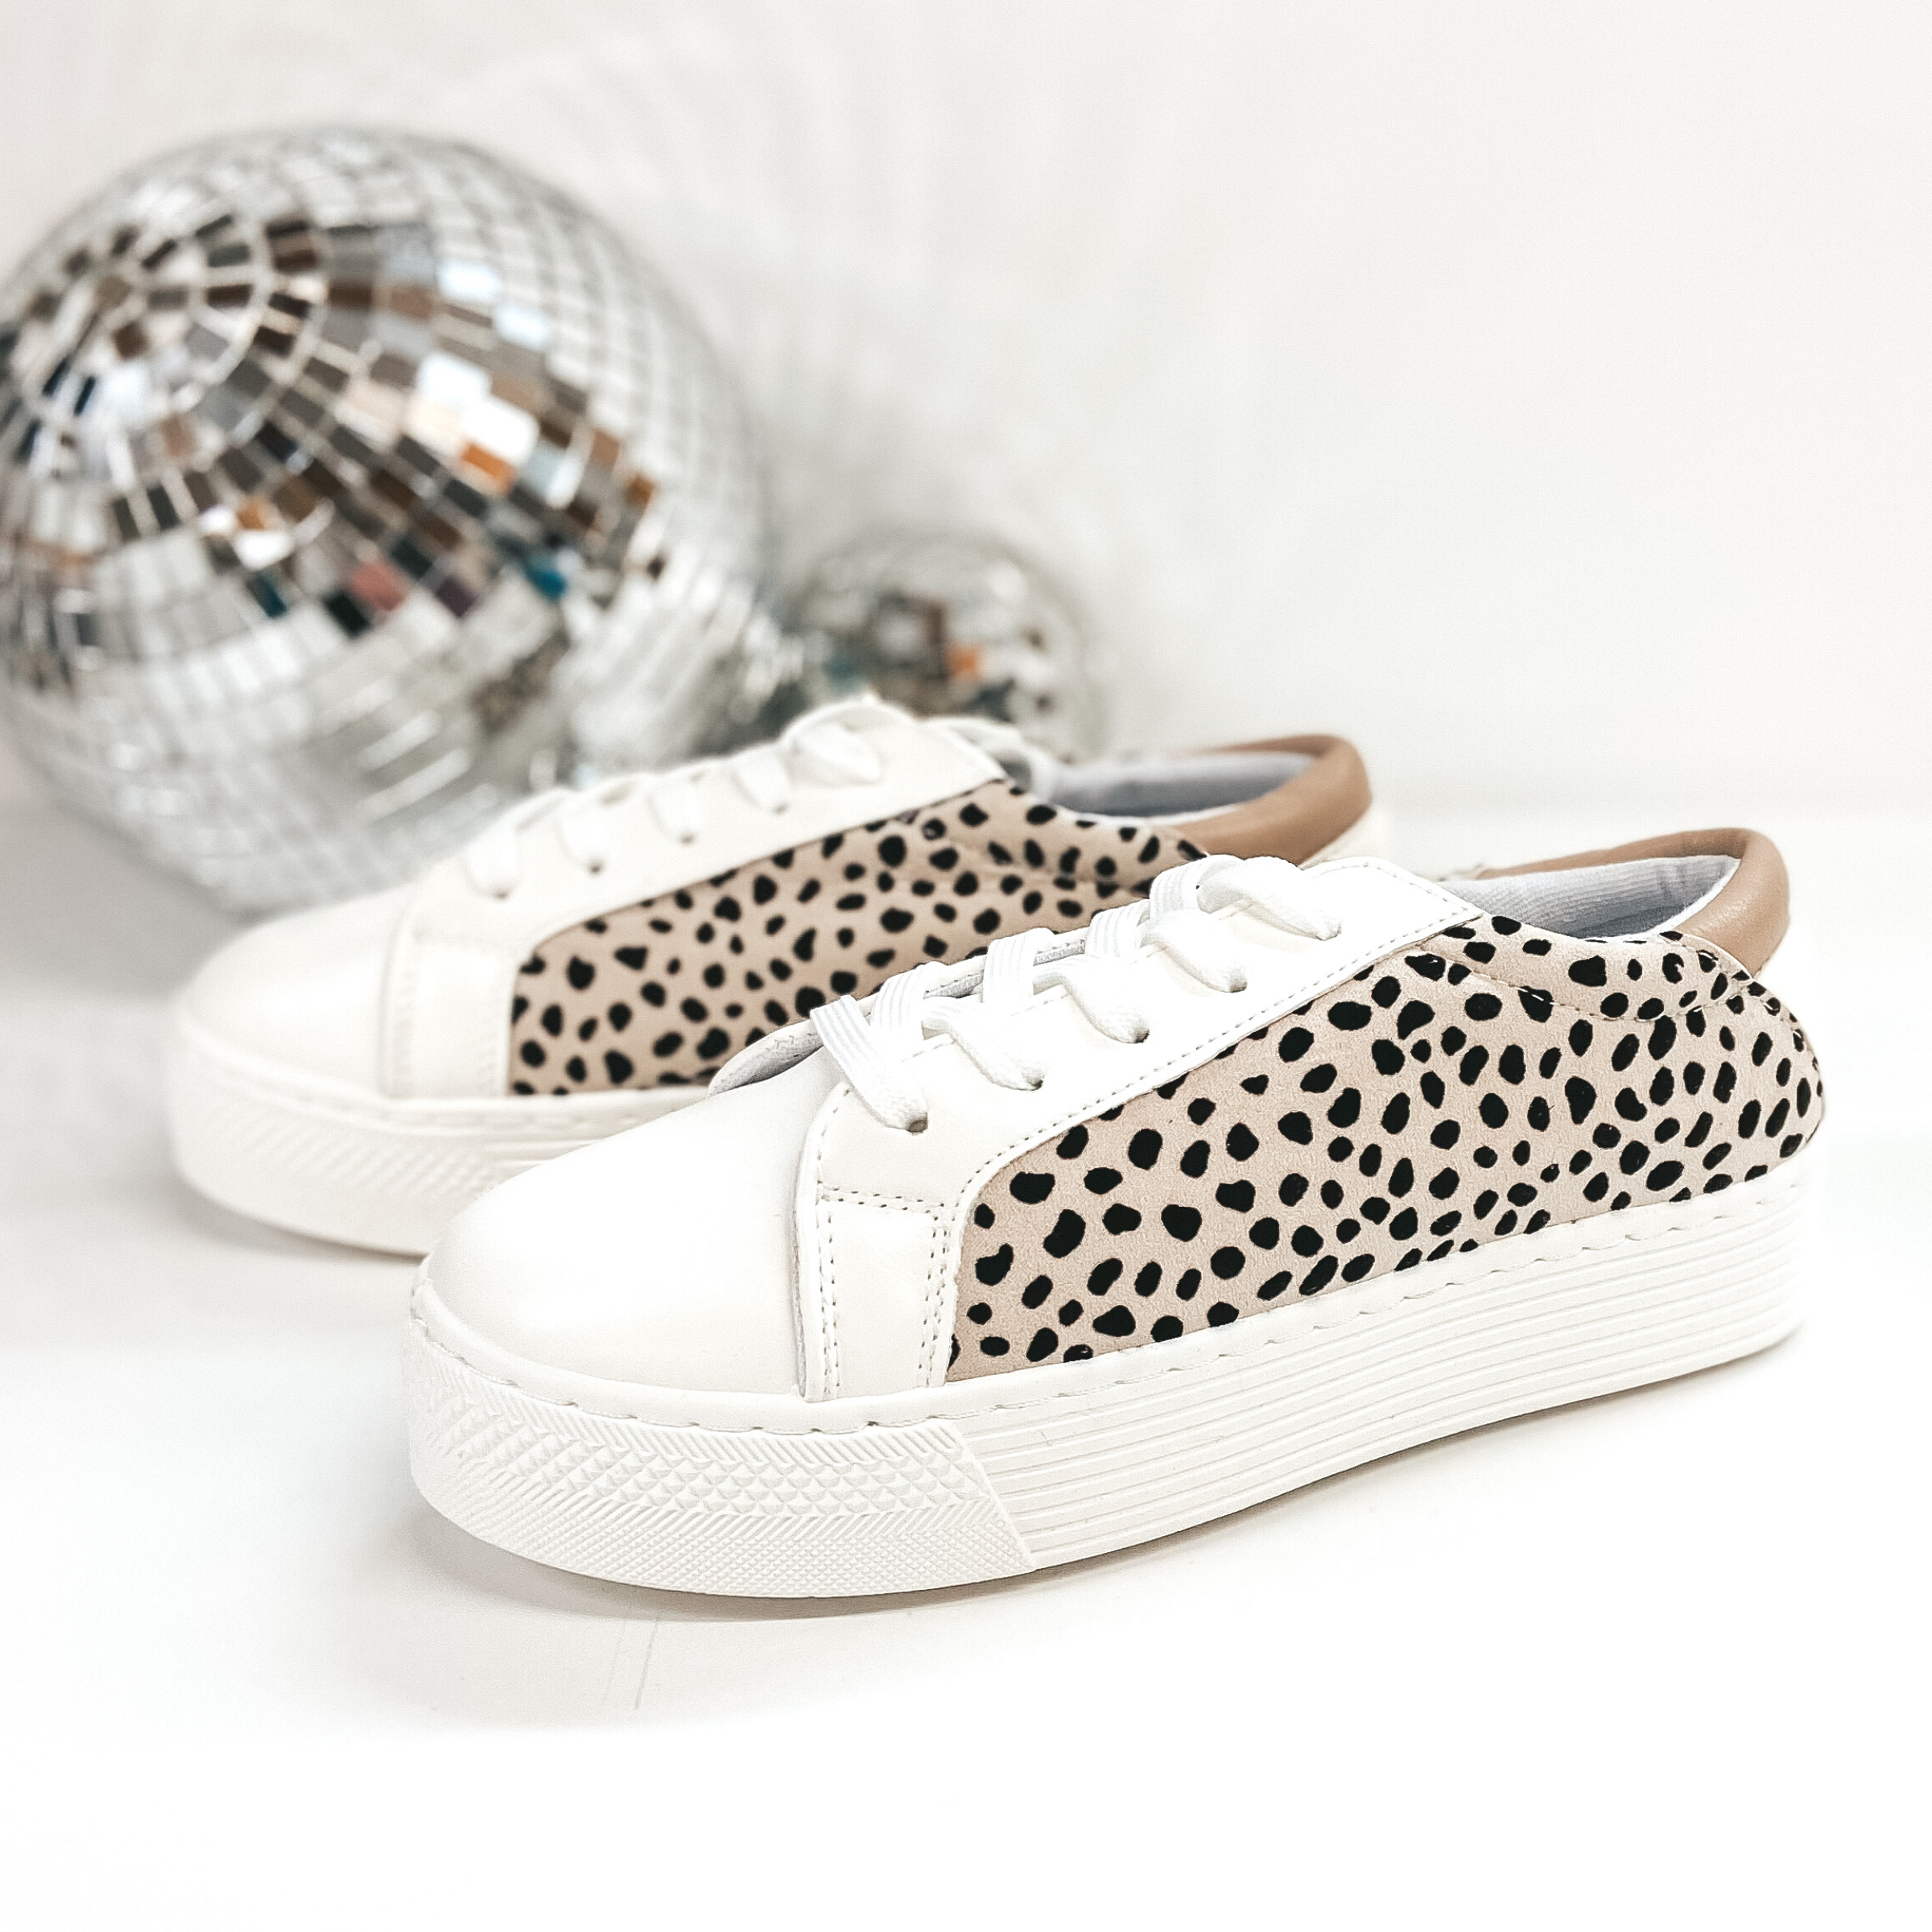 Casually Chic Lace Up Platform Sneakers in Dotted Leopard - Giddy Up Glamour Boutique